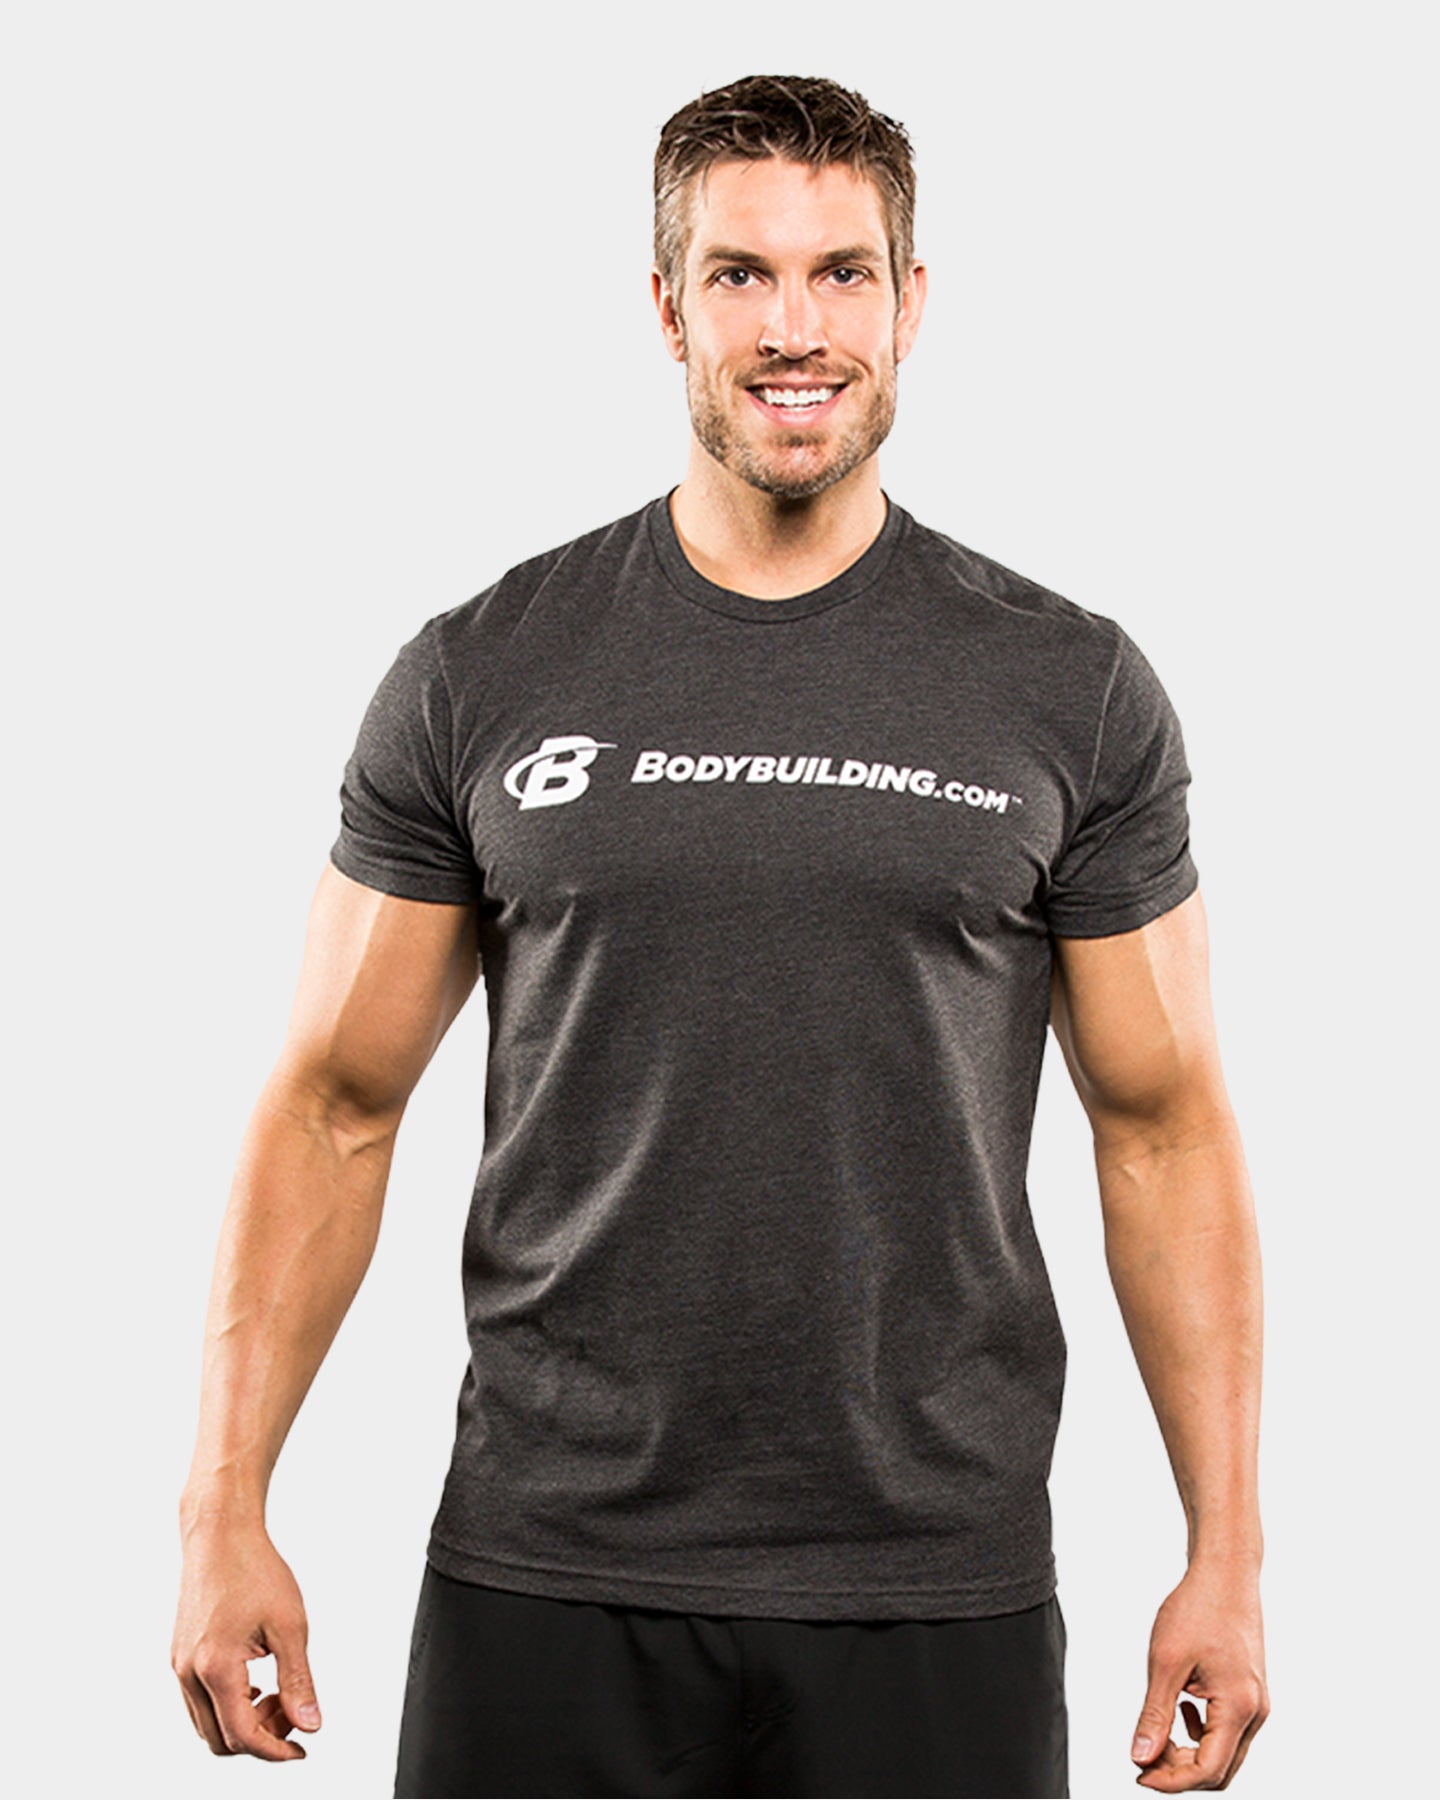 Donau Leer knuffel Core Simple Classic Tee by Bodybuilding.com Clothing at Bodybuilding.com -  Best Prices on Core Simple Classic Tee!